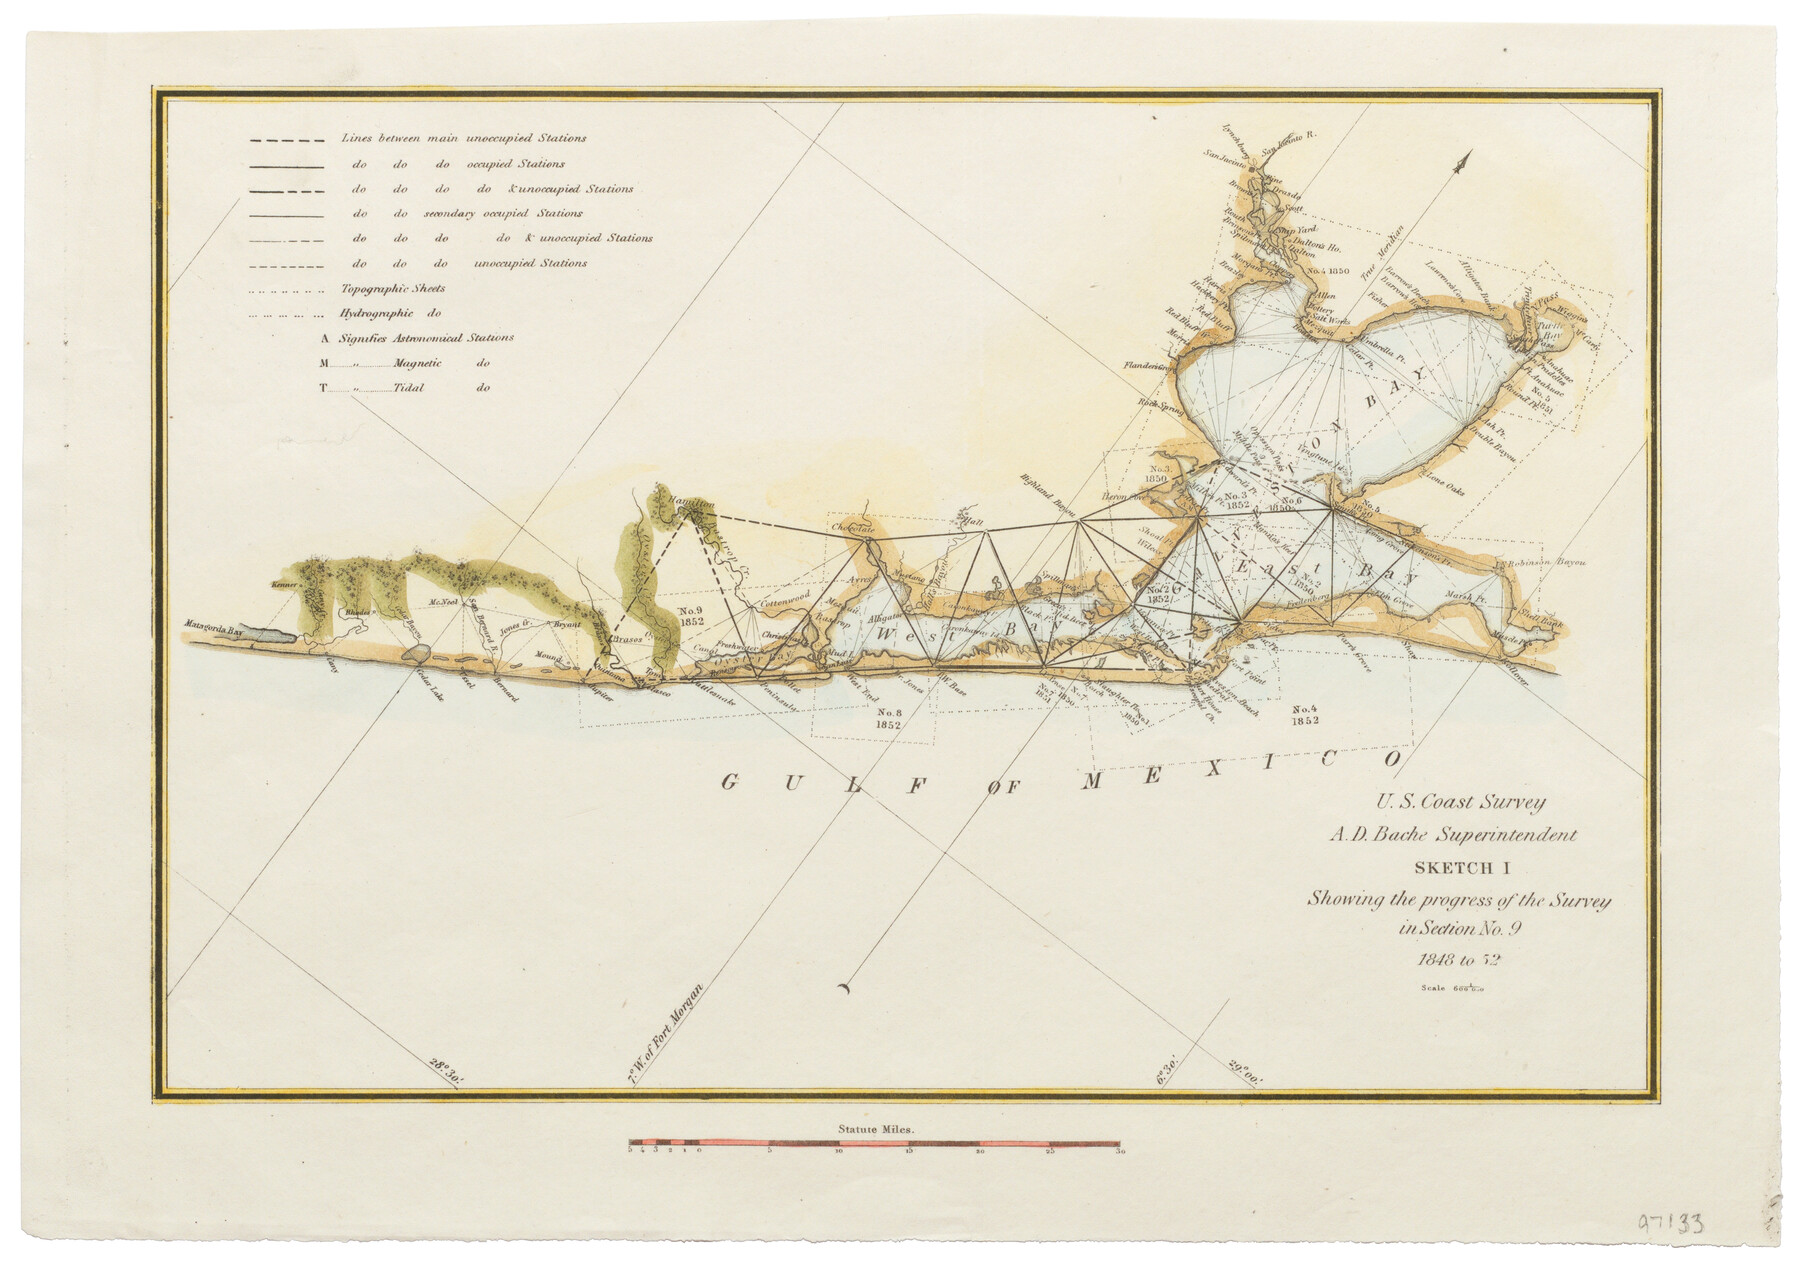 97133, Sketch I: Showing the Progress of the Survey in Section No. 9 [Galveston Bay]